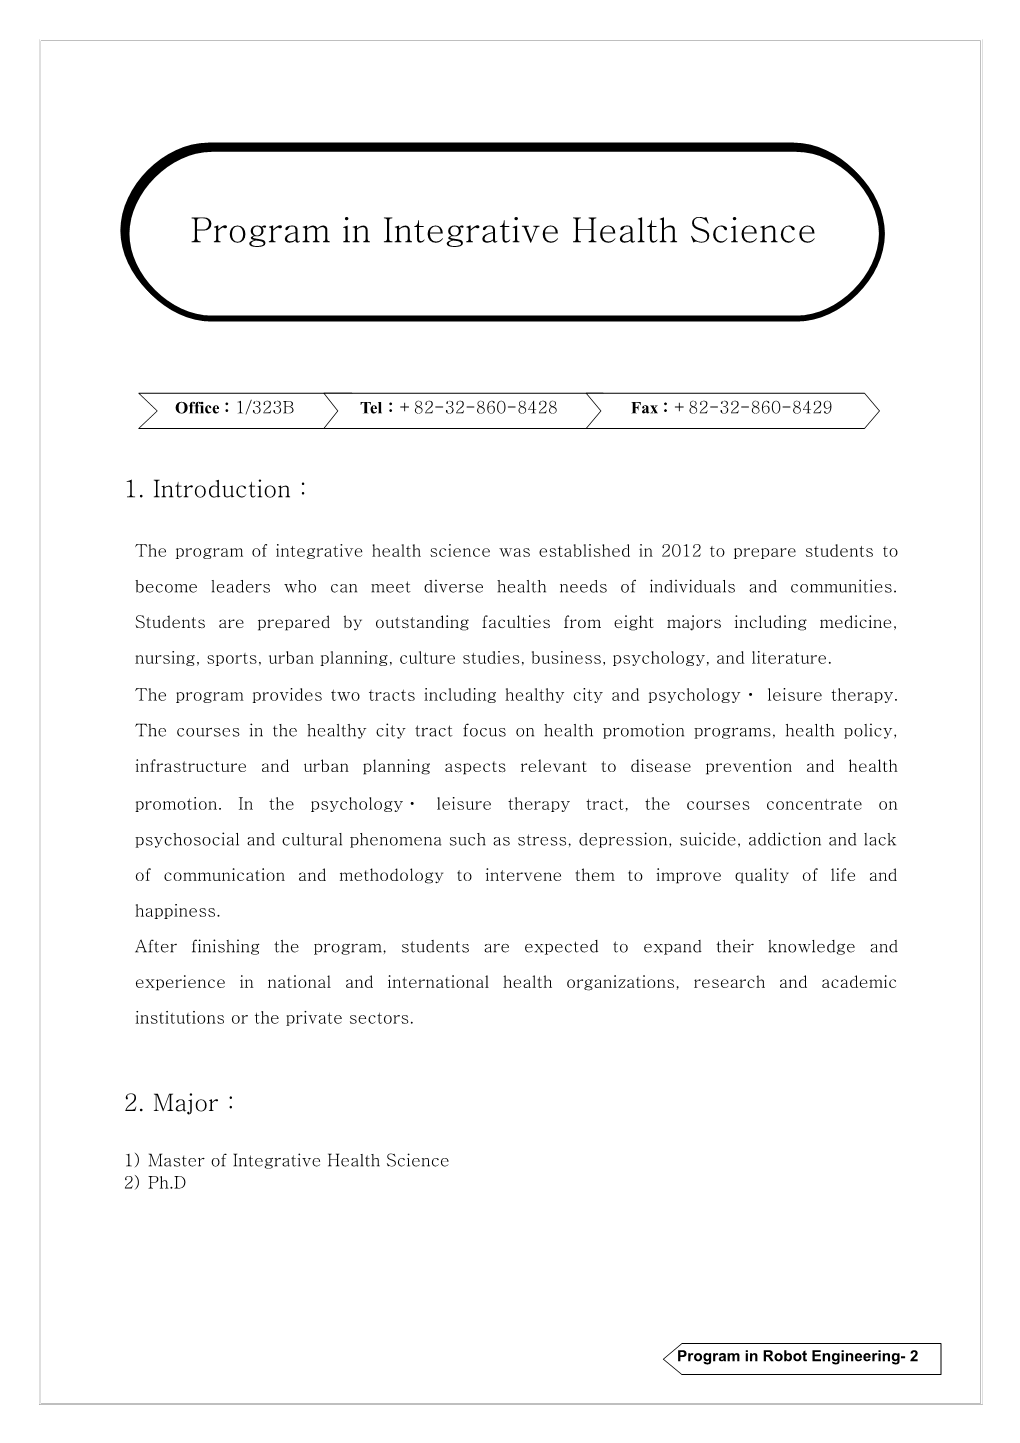 The Program of Integrative Health Science Was Established in 2012 to Prepare Students To